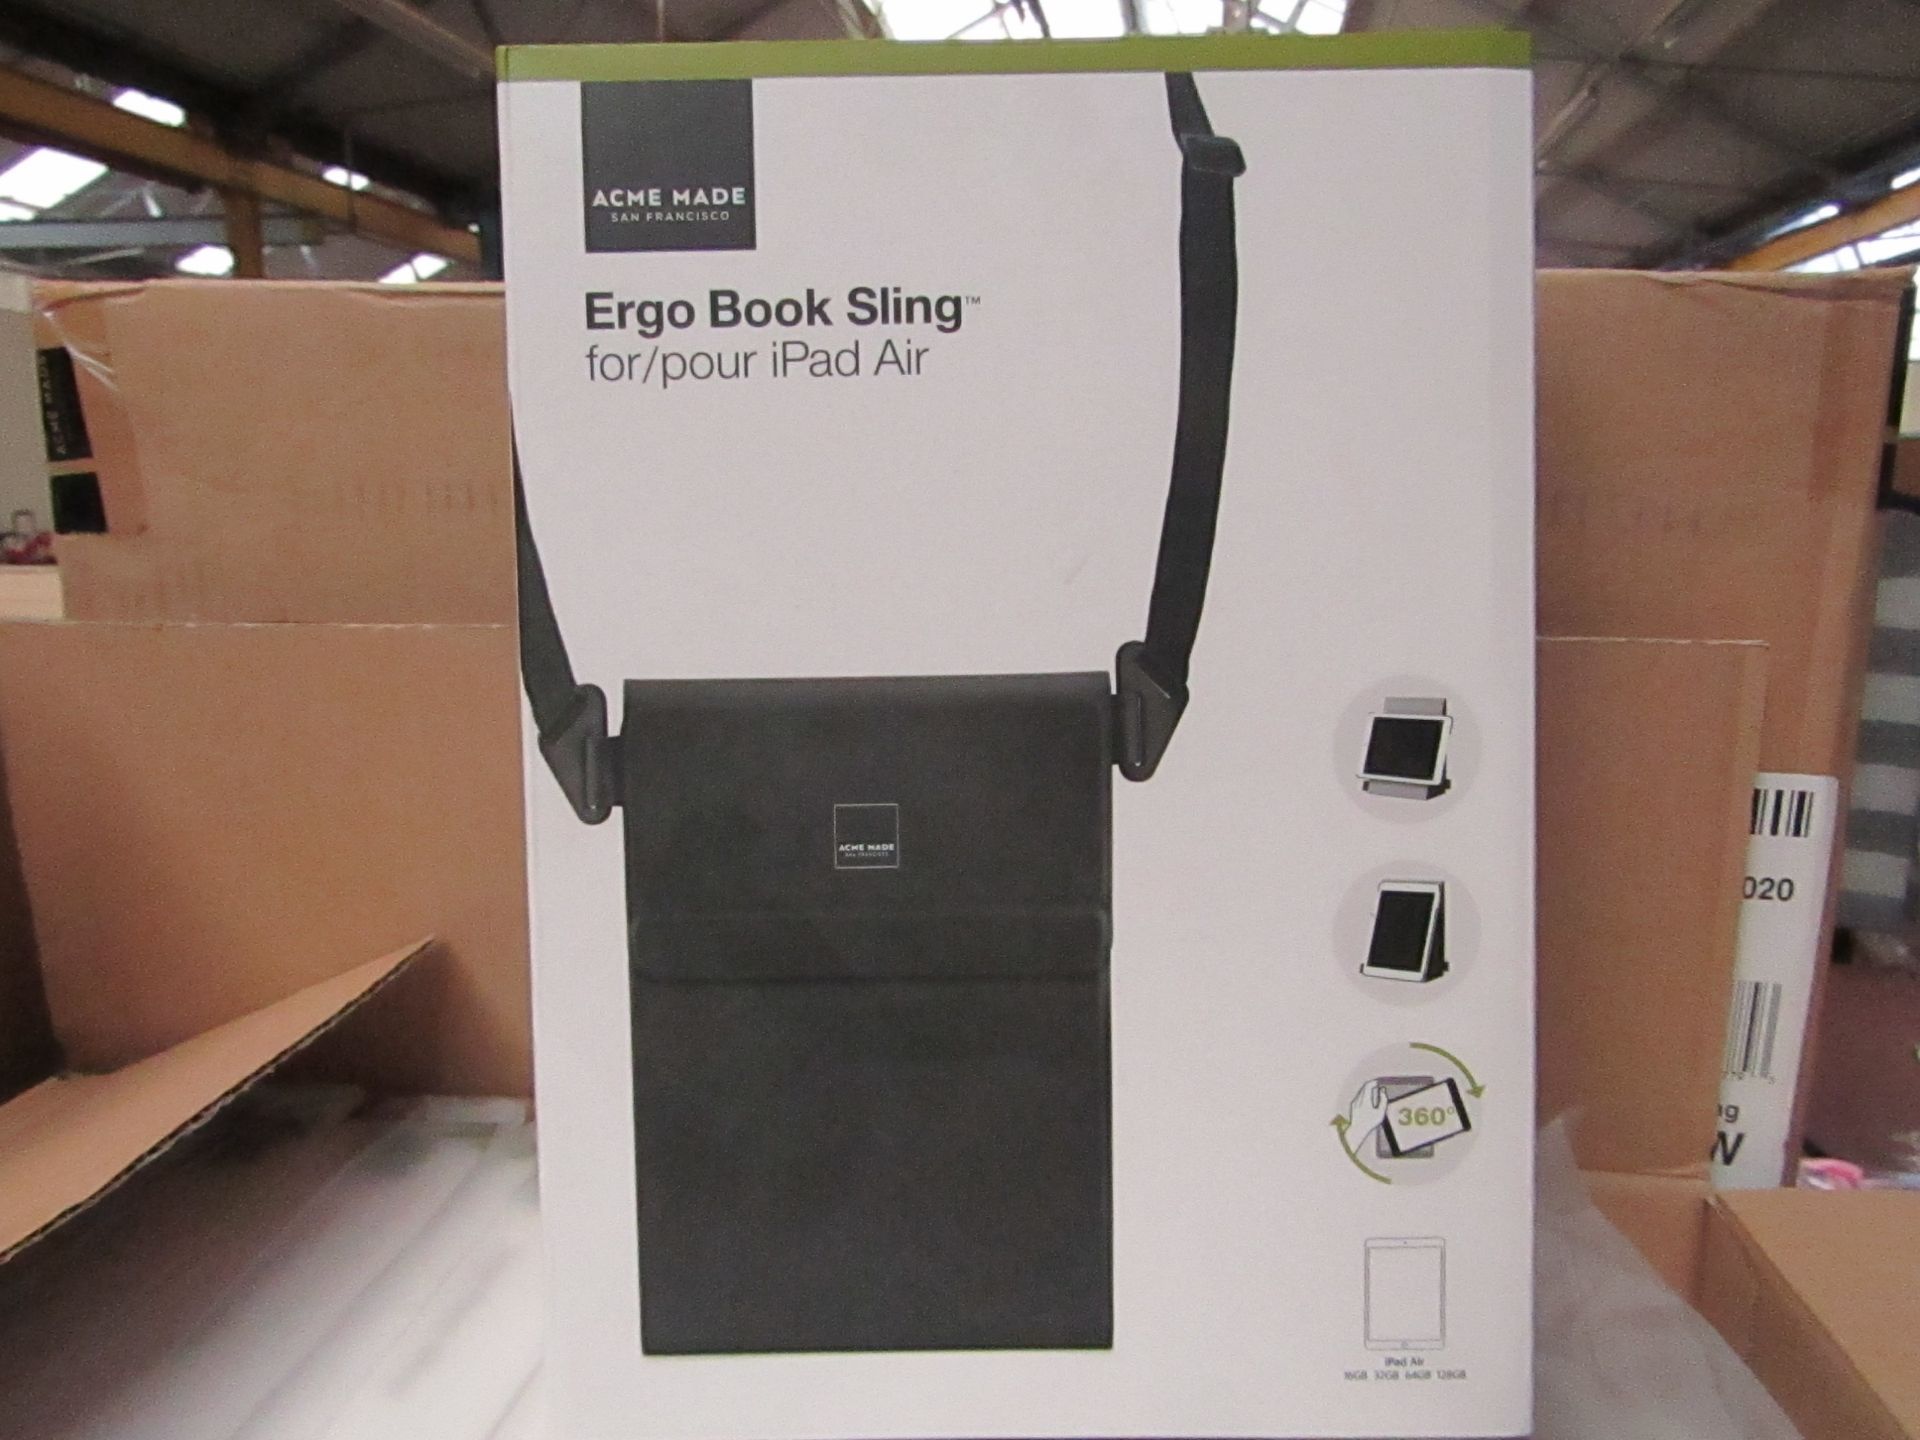 10 X Ergo Book Sling for Ipad Air new & boxed